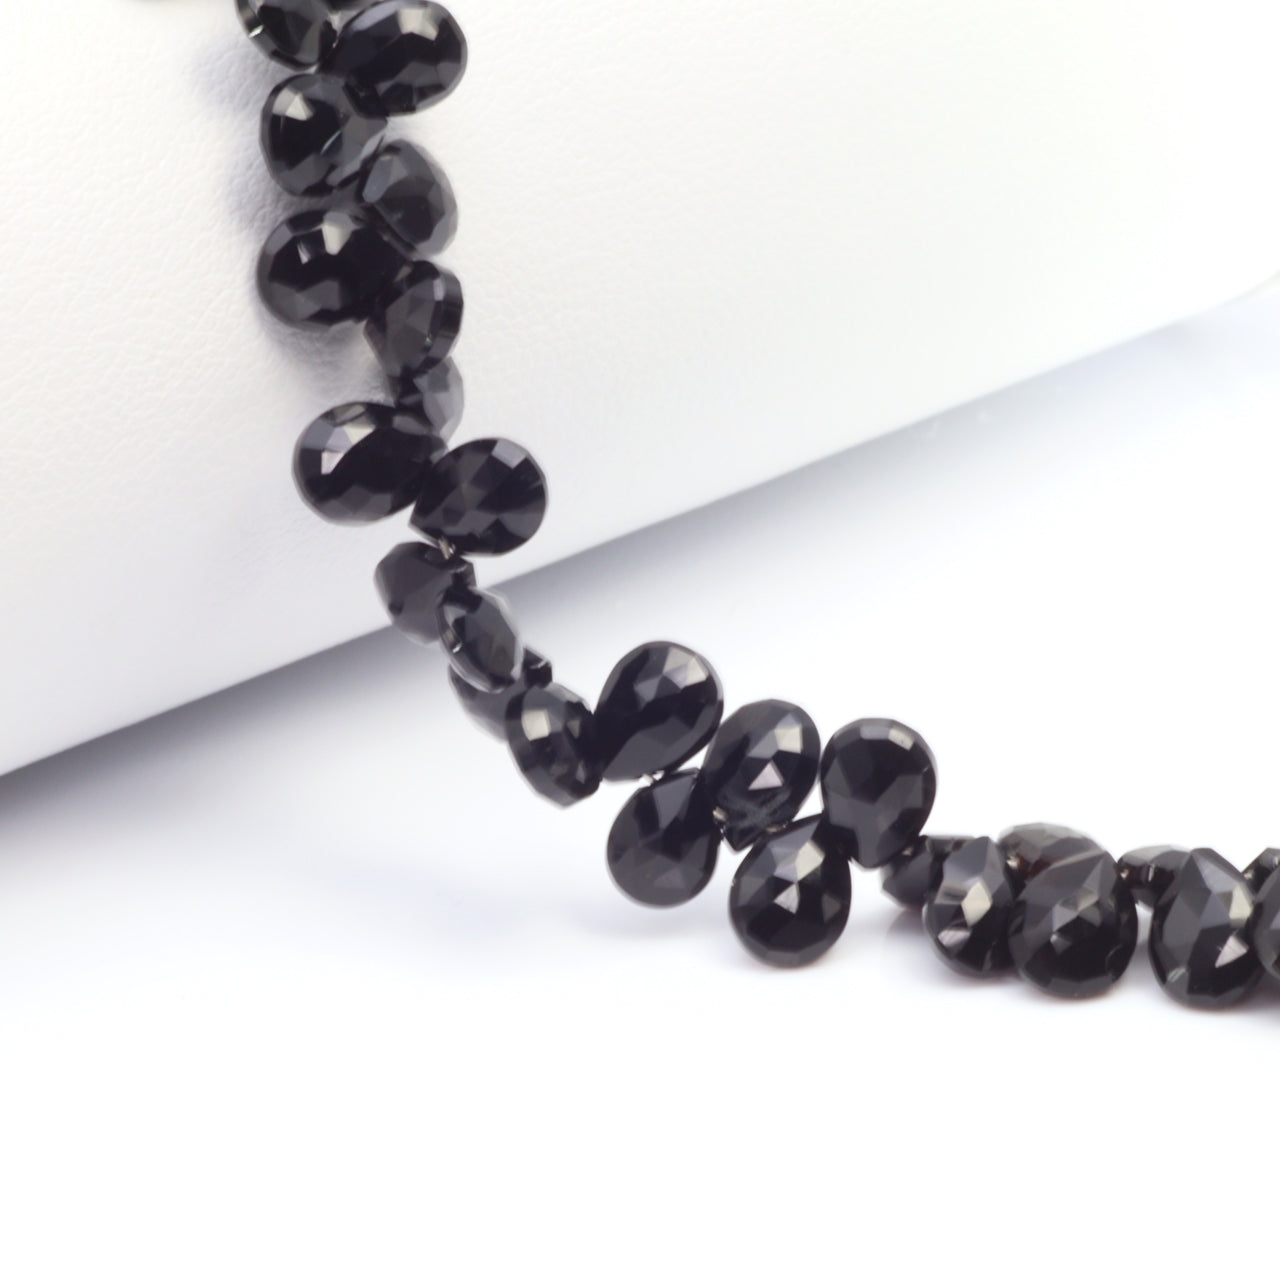 Black Spinel 7x4mm Faceted Pear Shaped Briolettes